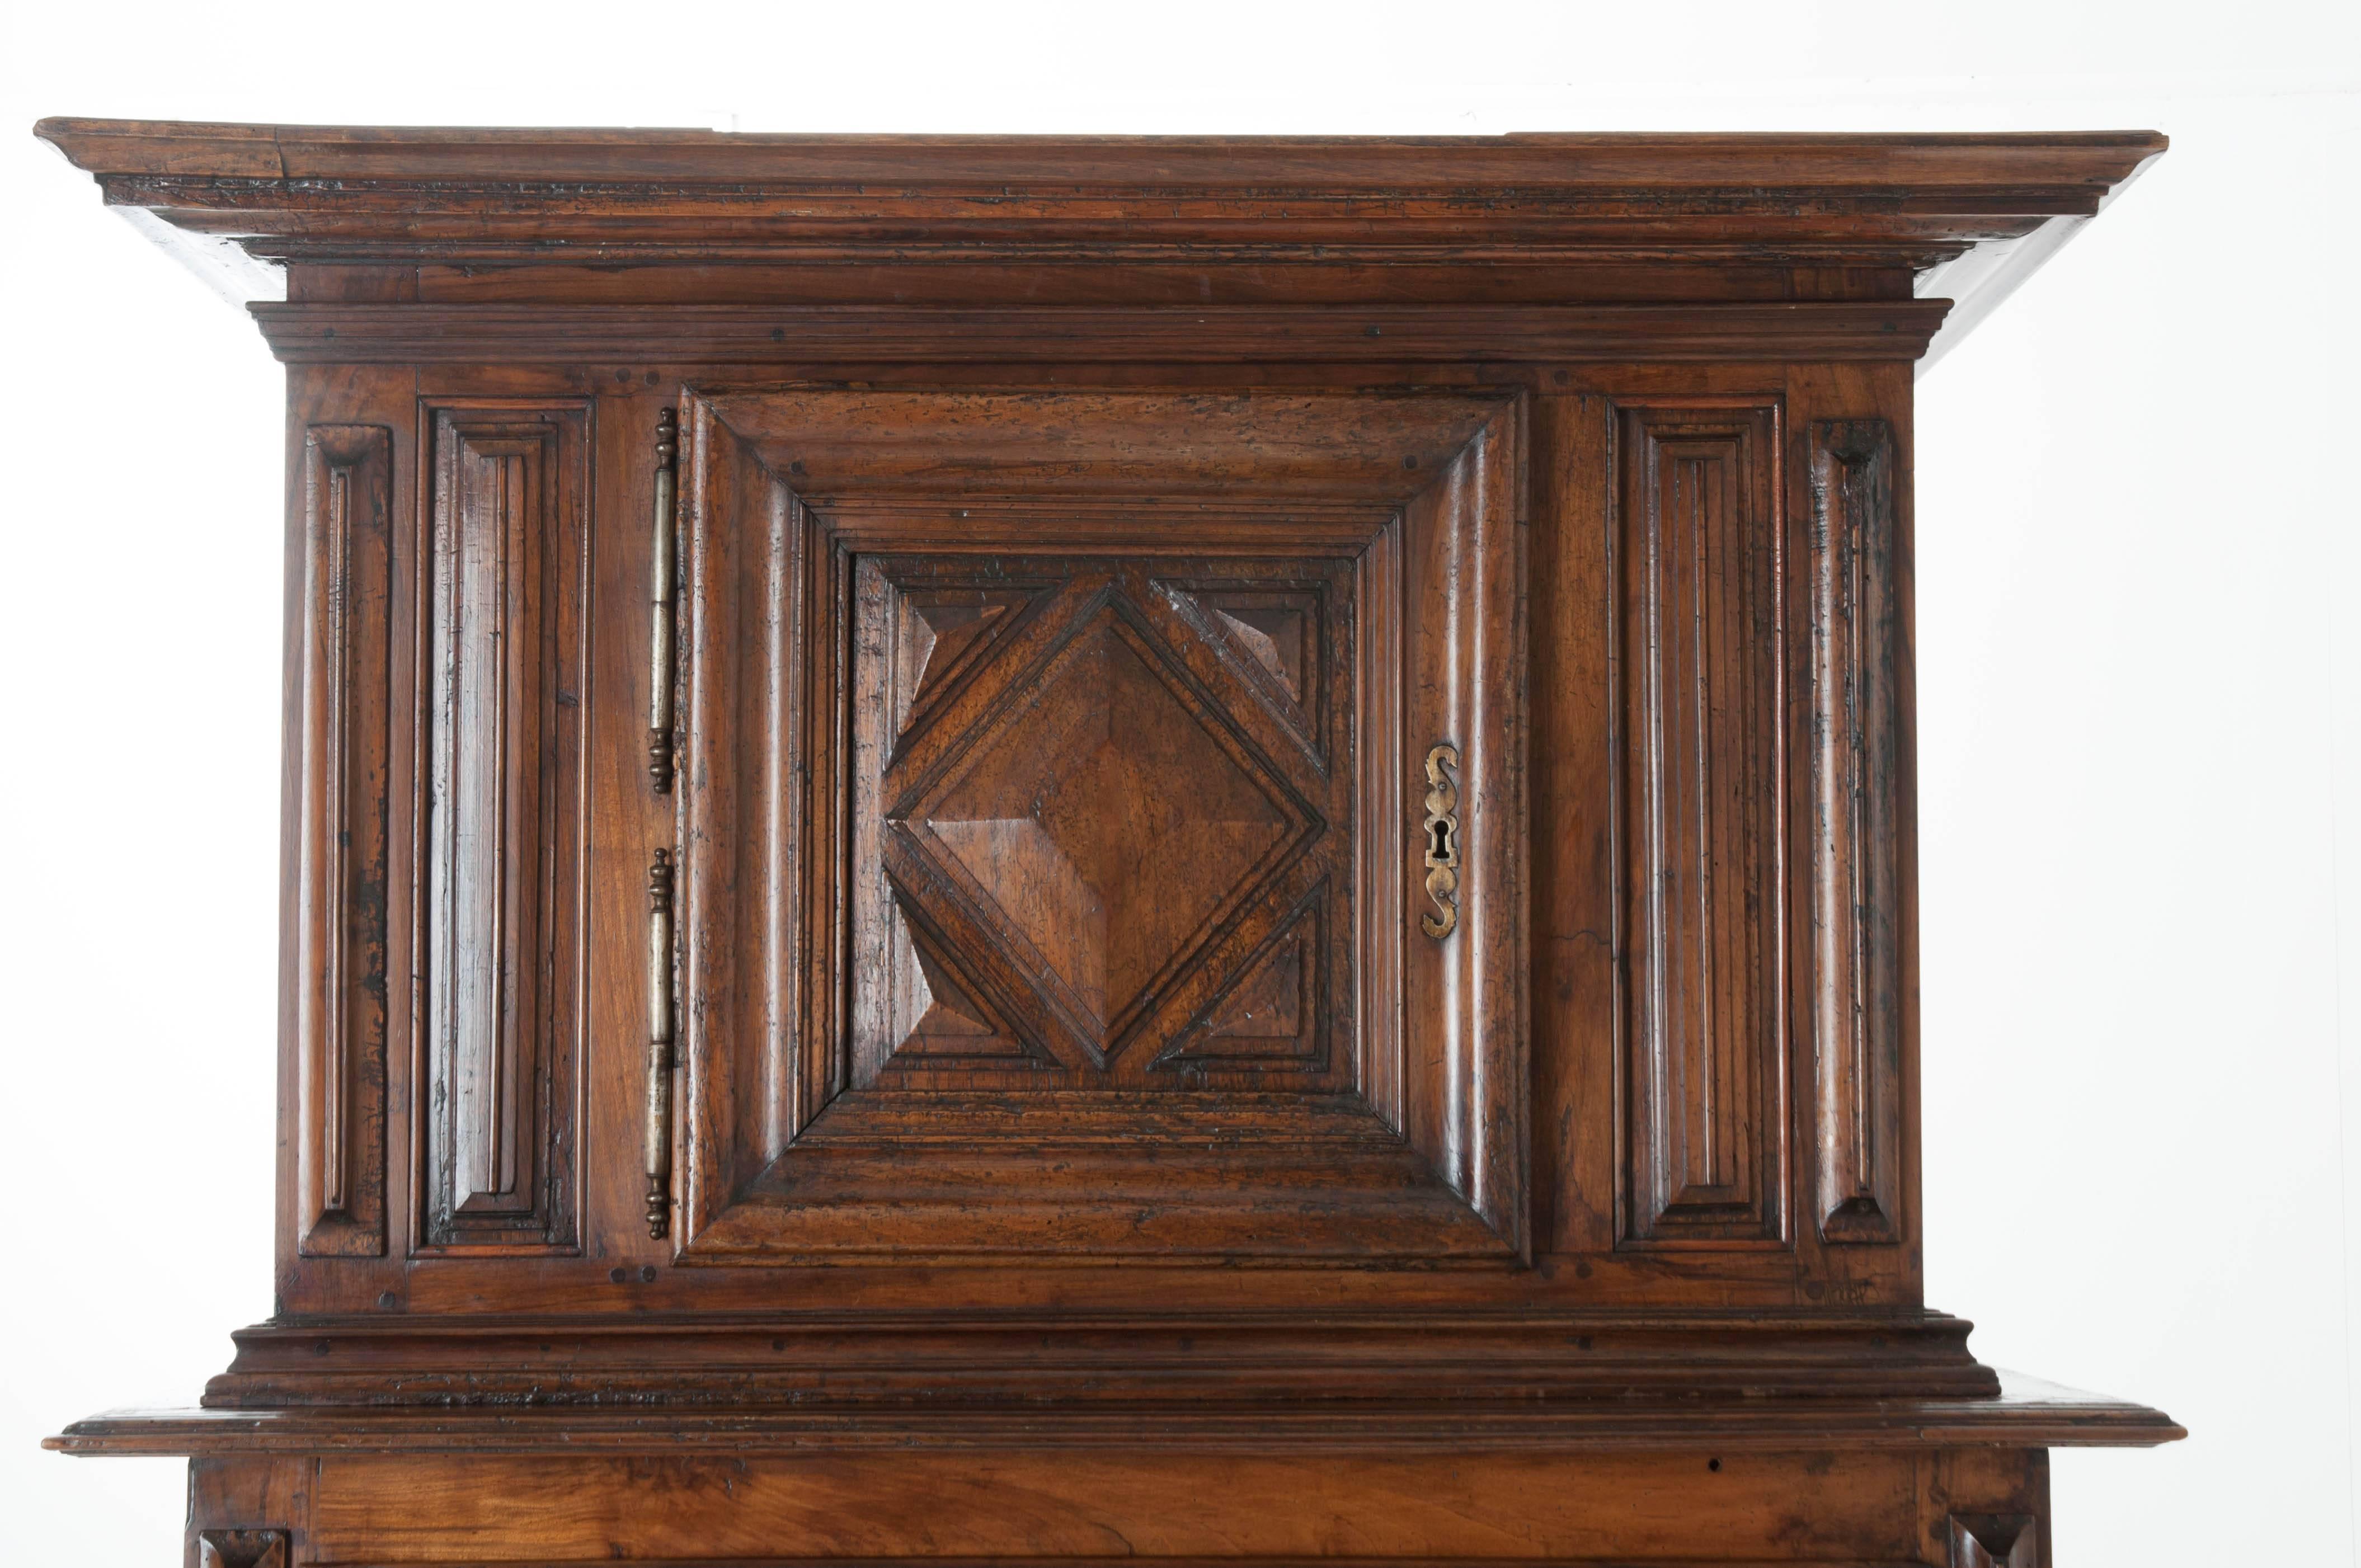 A nearly 400 year old walnut buffet a deux corps from 17th century, France. This Louis XIII period piece features two heavy, lockable doors with geometric carvings in deep relief. These doors are hung on barrel hinges and are separated by a lockable